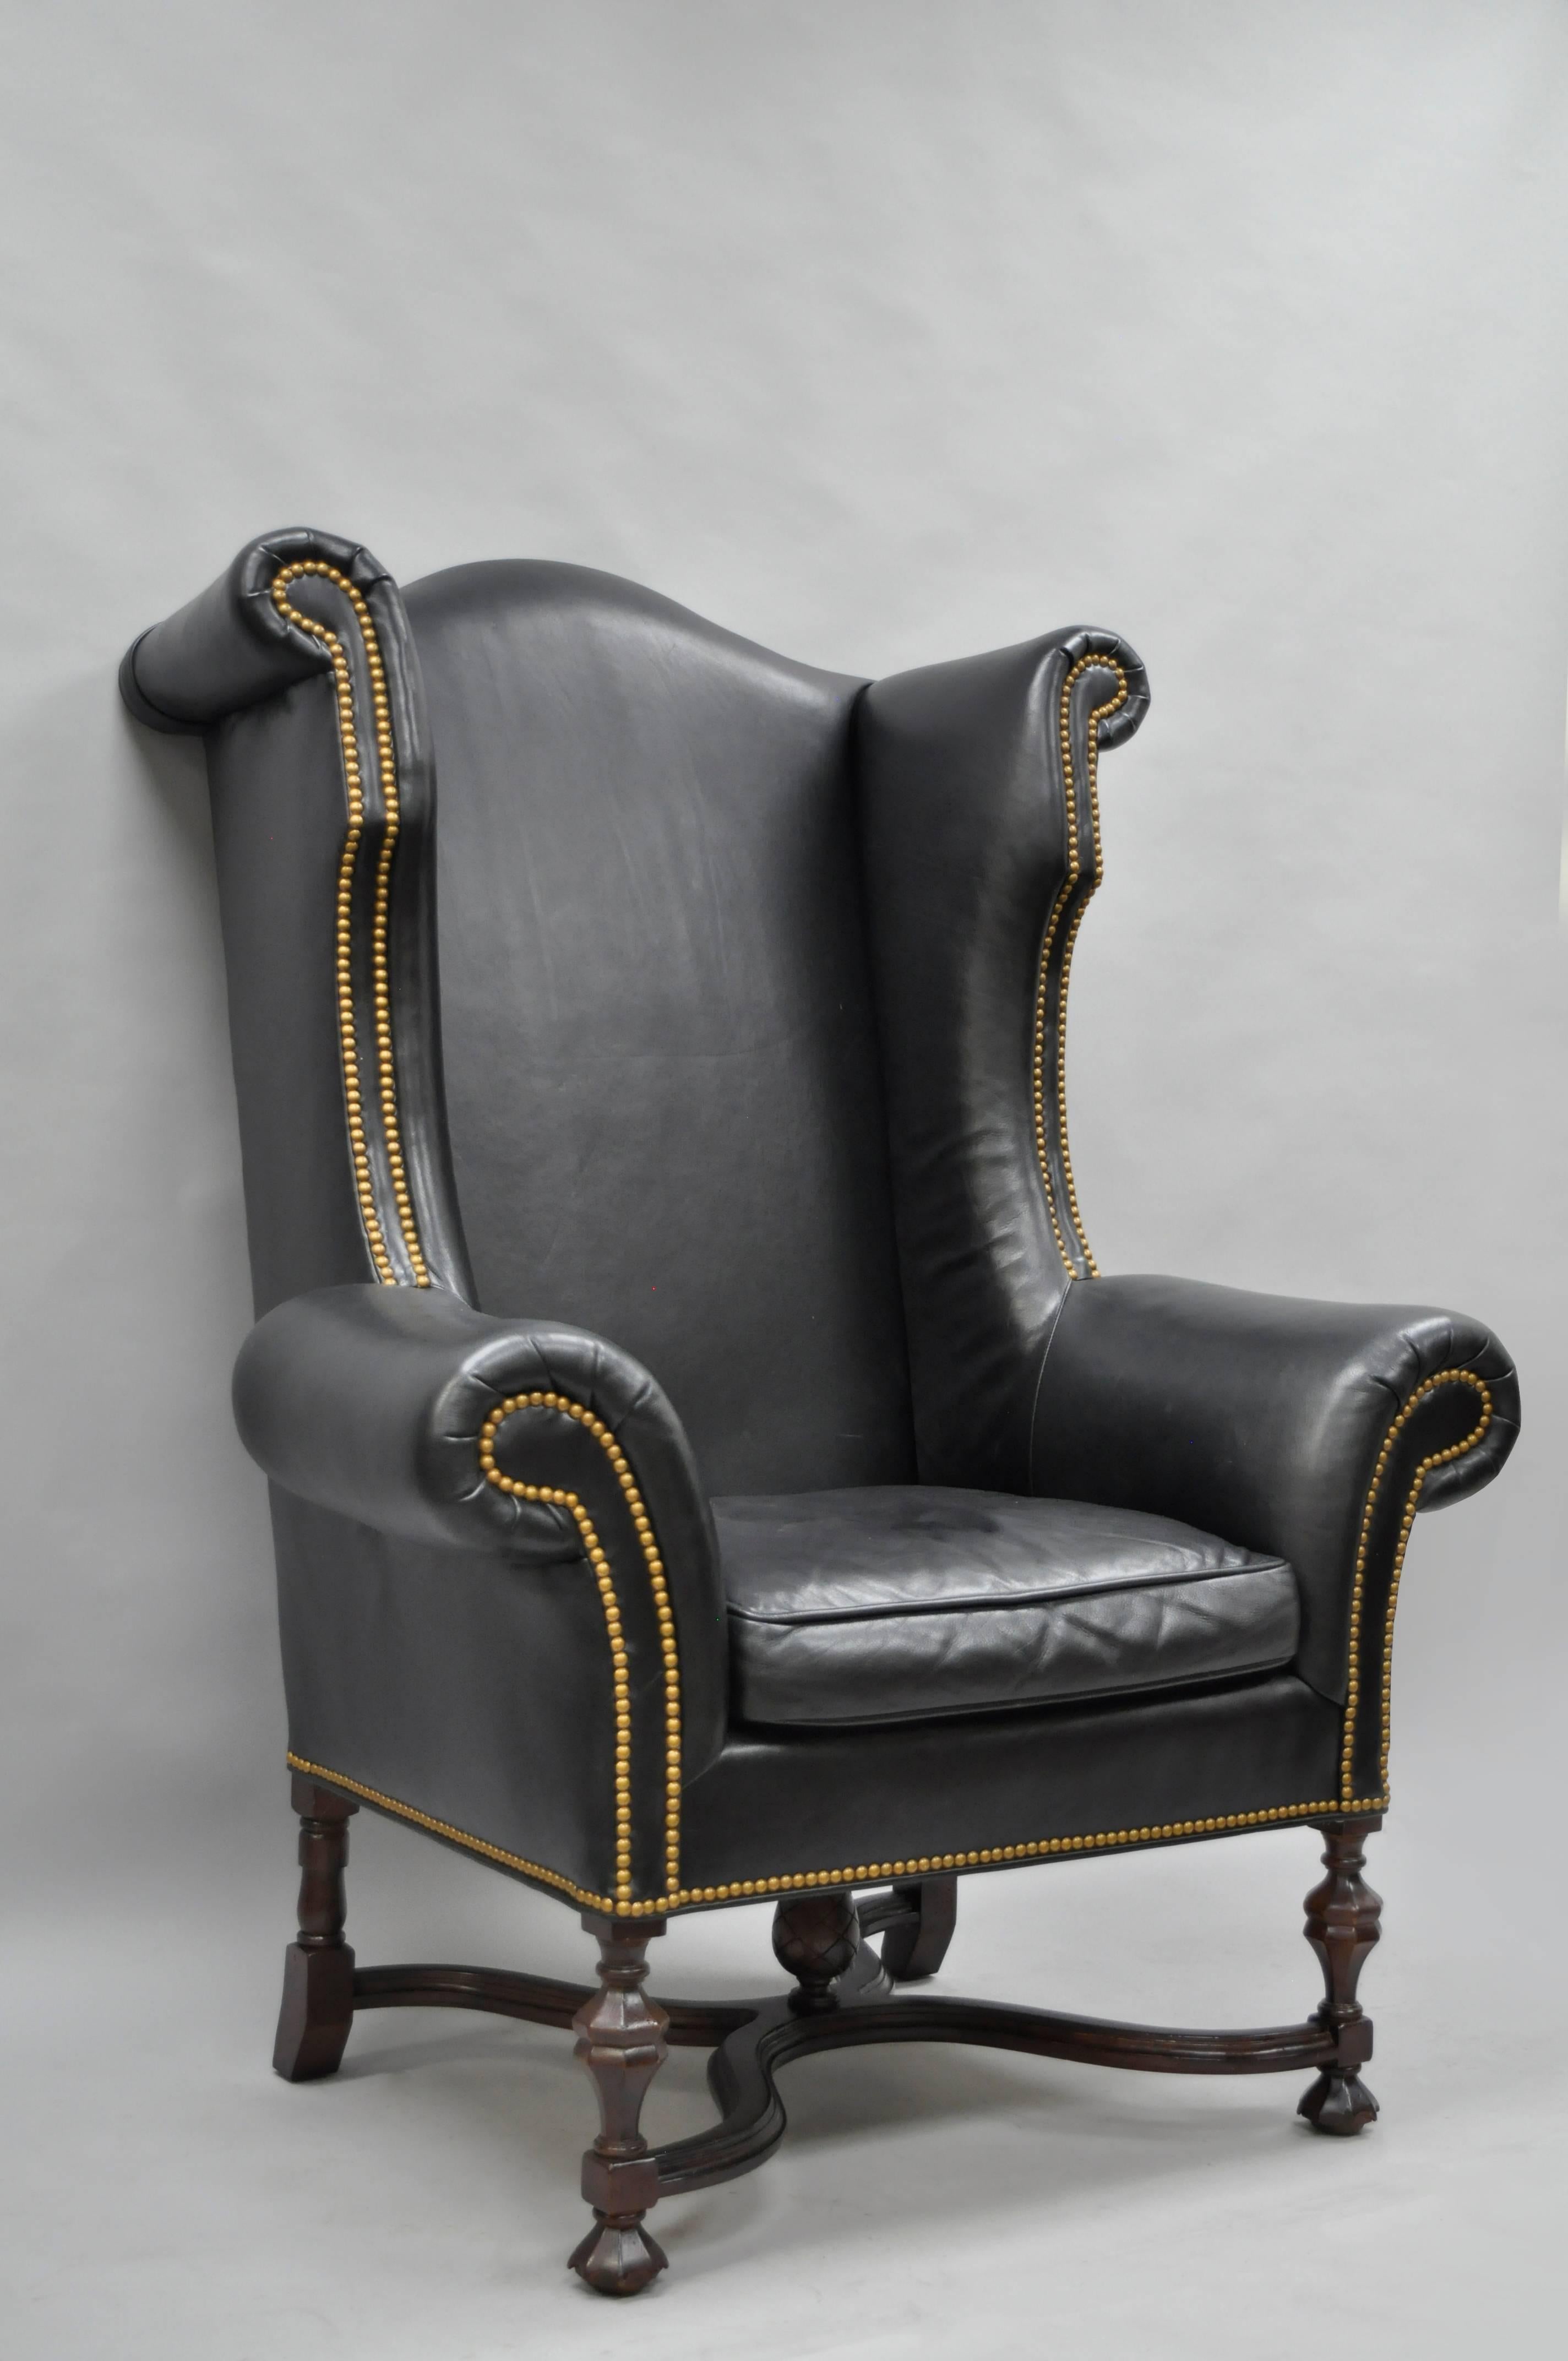 Large and Stately William and Mary black leather wingback chair (Item H4274-20) by Lee Jofa. Item features a oversize frame with rolled arms and back, brass nailhead trim throughout, solid carved wood stretcher base with carved acorn/pineapple